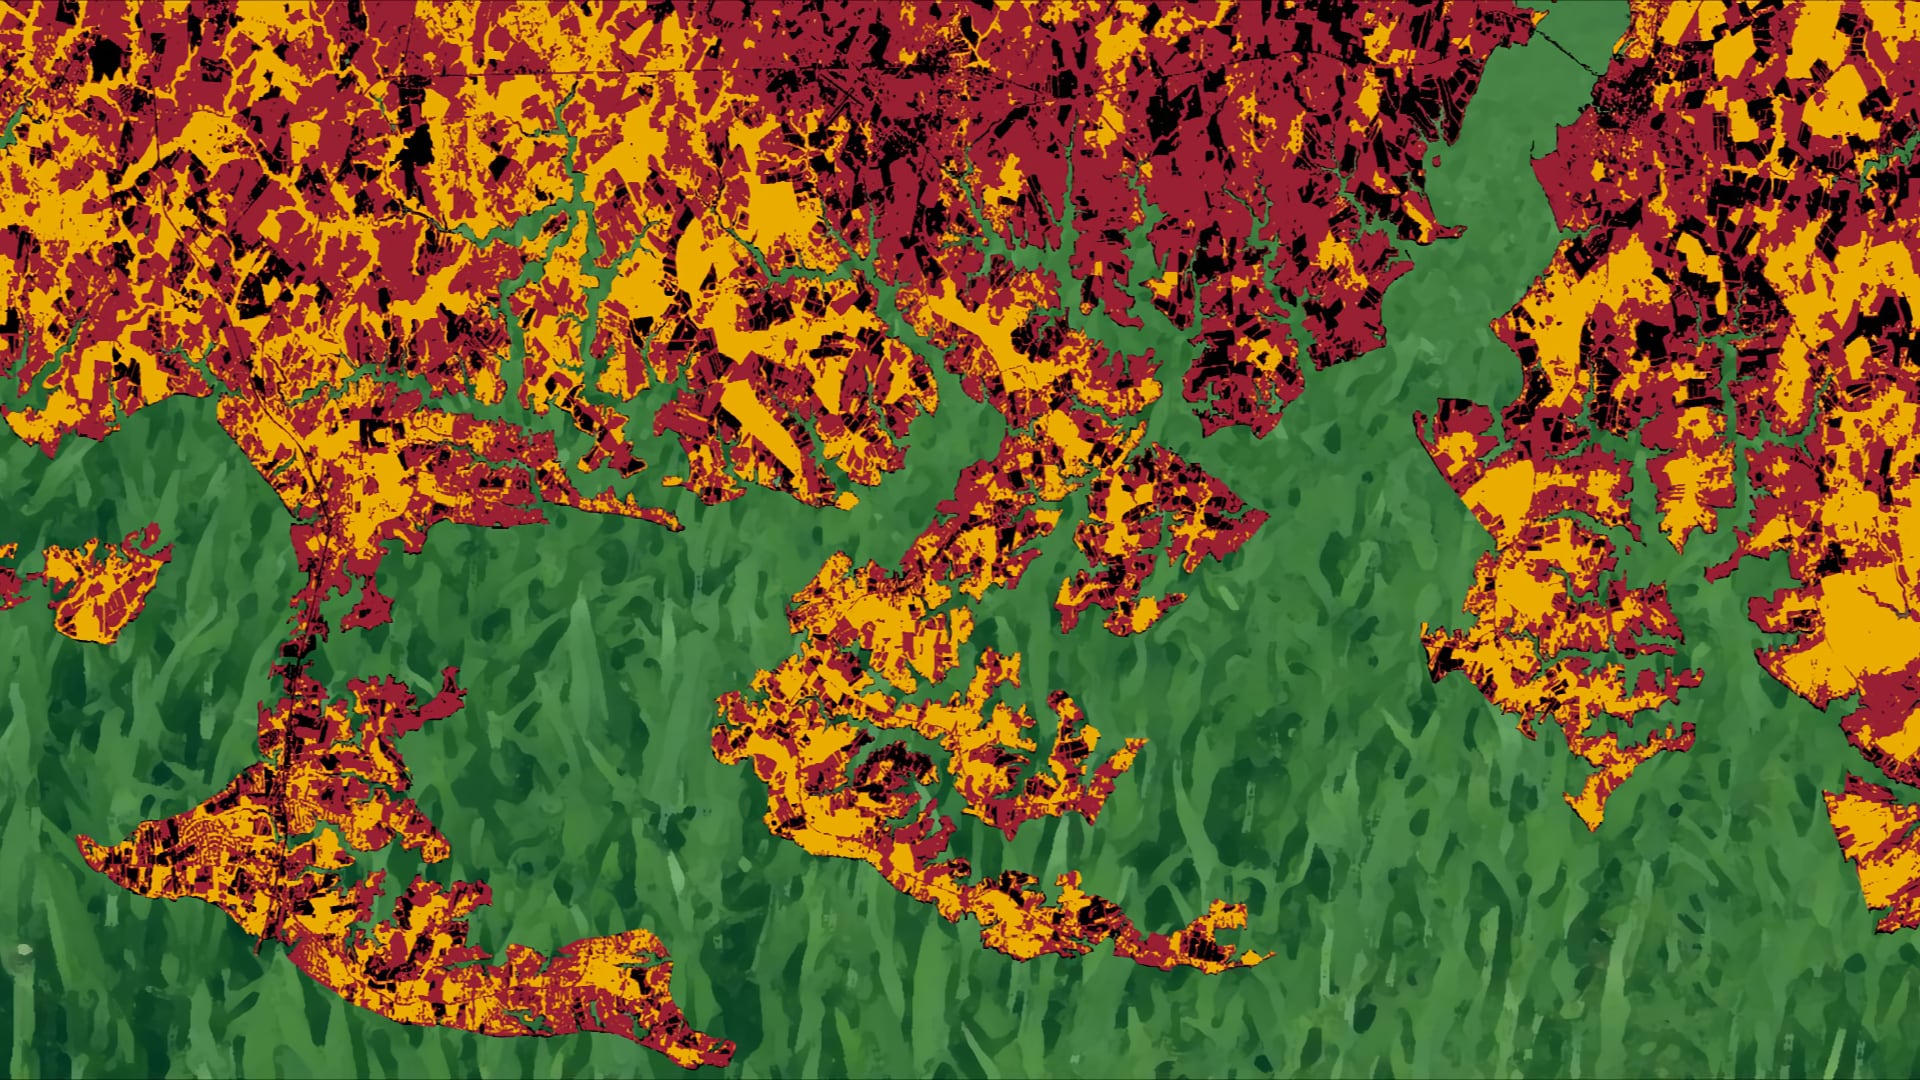 Imagery displaying Normalized Difference Vegetation Index (NDVI) values calculated from 2018 Landsat 8 OLI data and cropped to a subset of Eastern Maryland bordering the Chesapeake Bay. Black areas correspond to regions of low vegetation density, red to medium vegetation density, and yellow to high vegetation density. Within agricultural regions, low NDVI may indicate areas in which local stakeholders could commit additional resources. Water has been replaced with a stylized cover crop image (green).